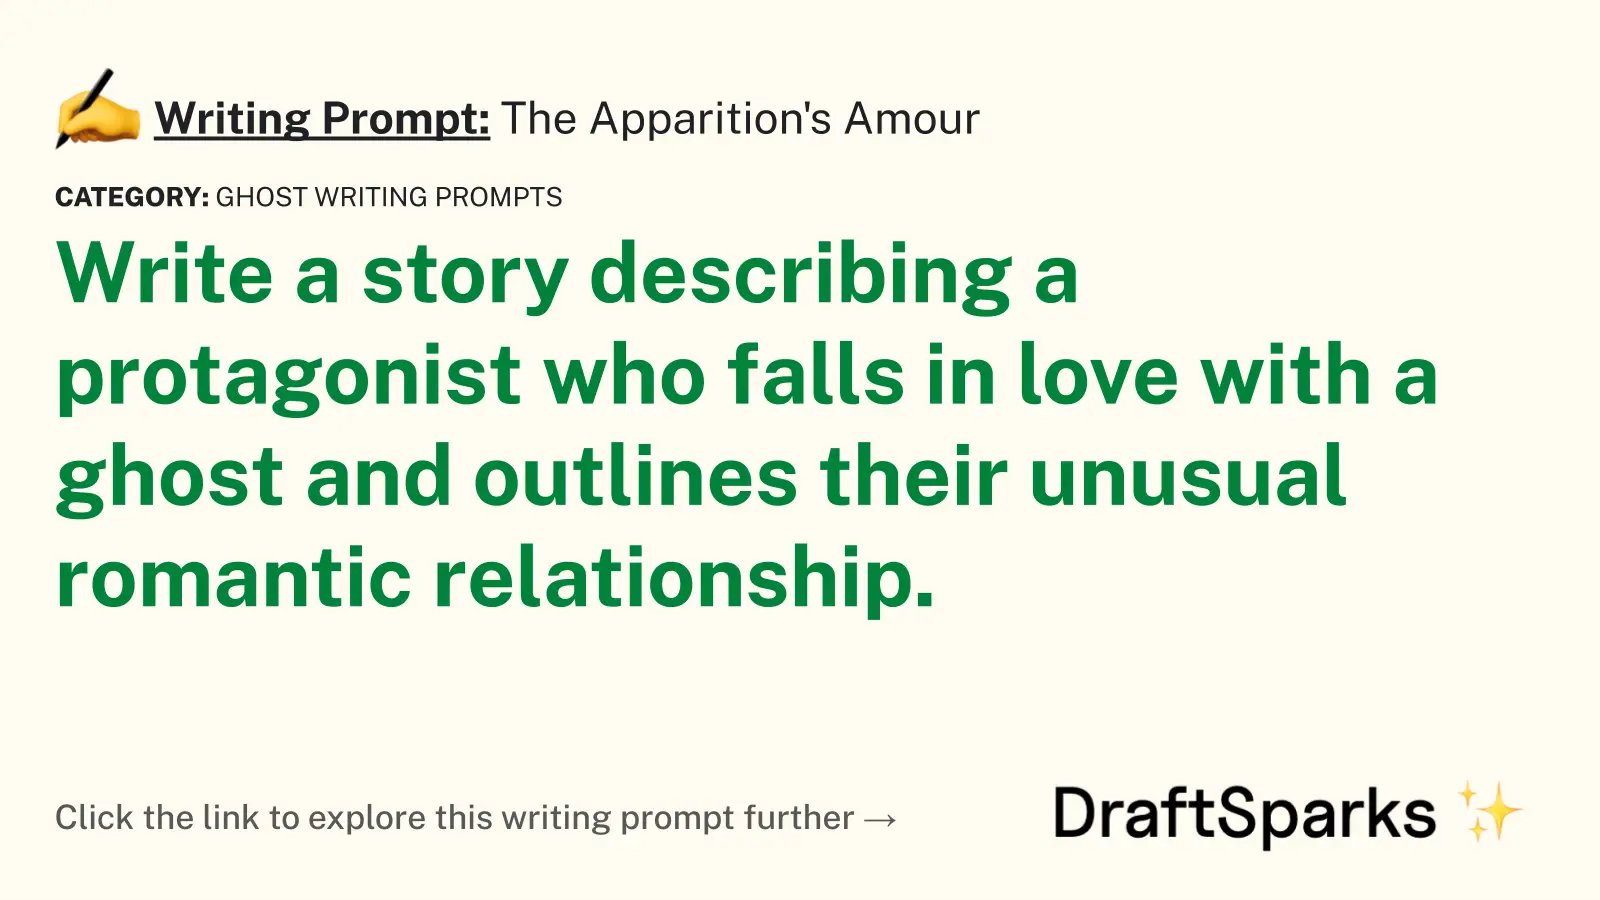 The Apparition’s Amour